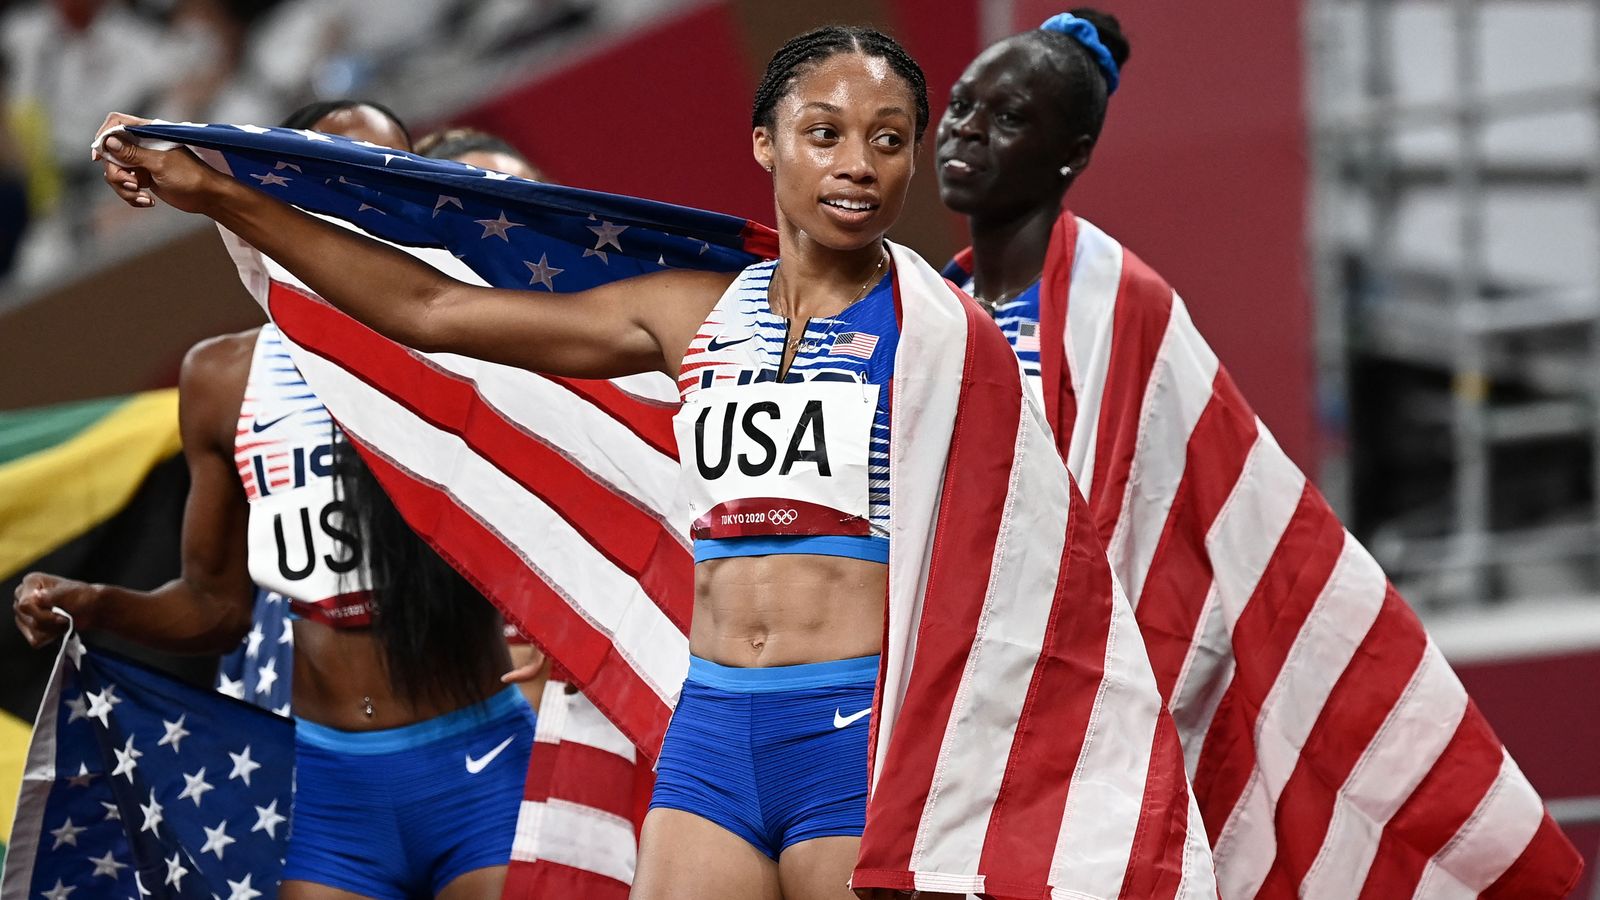 Allyson Felix Becomes Most Decorated Us Olympic Track Athlete With 11 Medals 